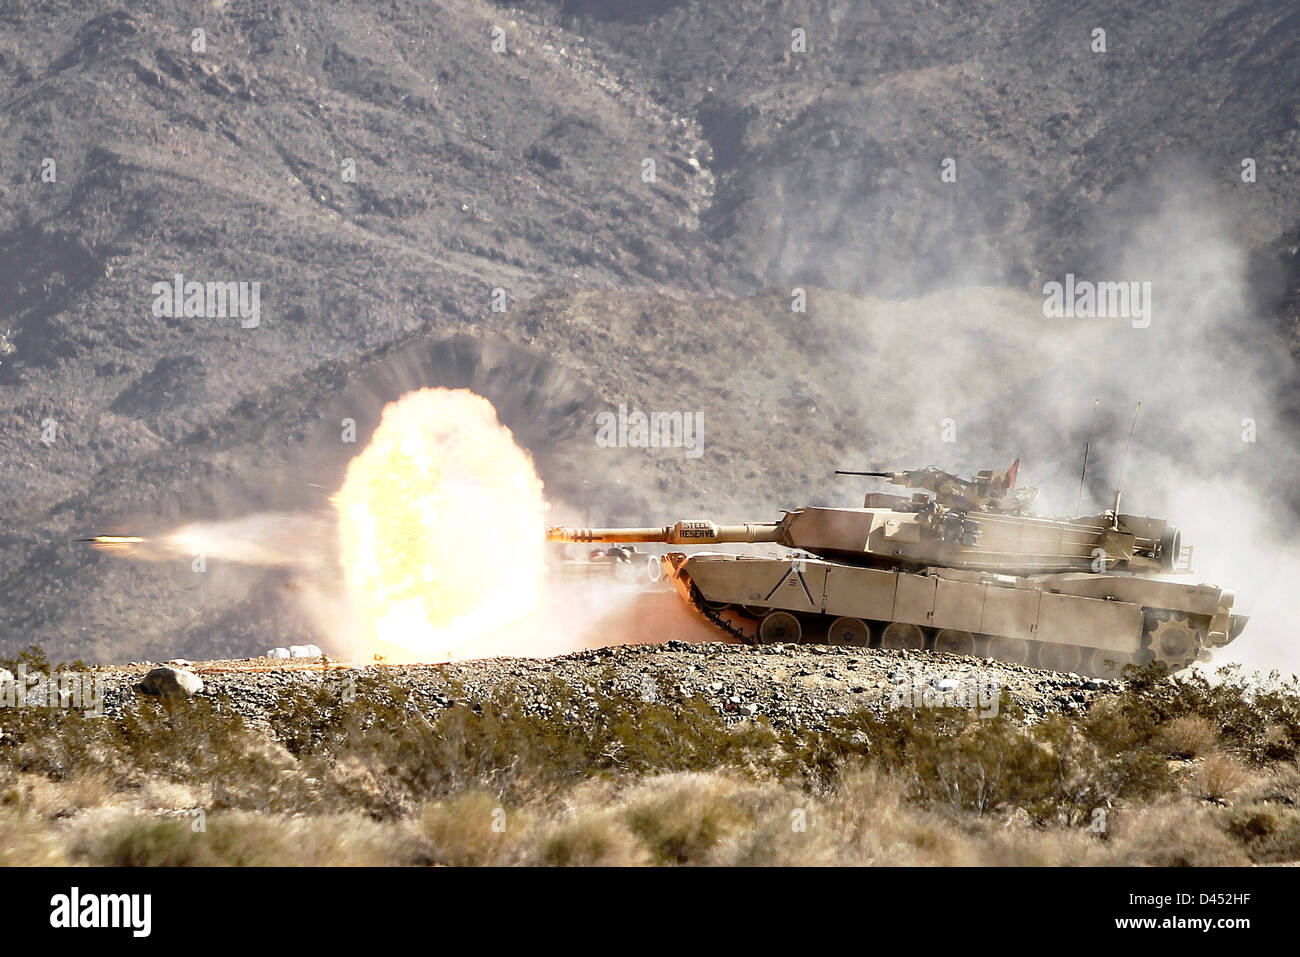 A US Army M1A2 Abrams tank fires a sabot round during annual gunnery qualifications February 17, 2013 in Twentynine Palms, CA. Stock Photo